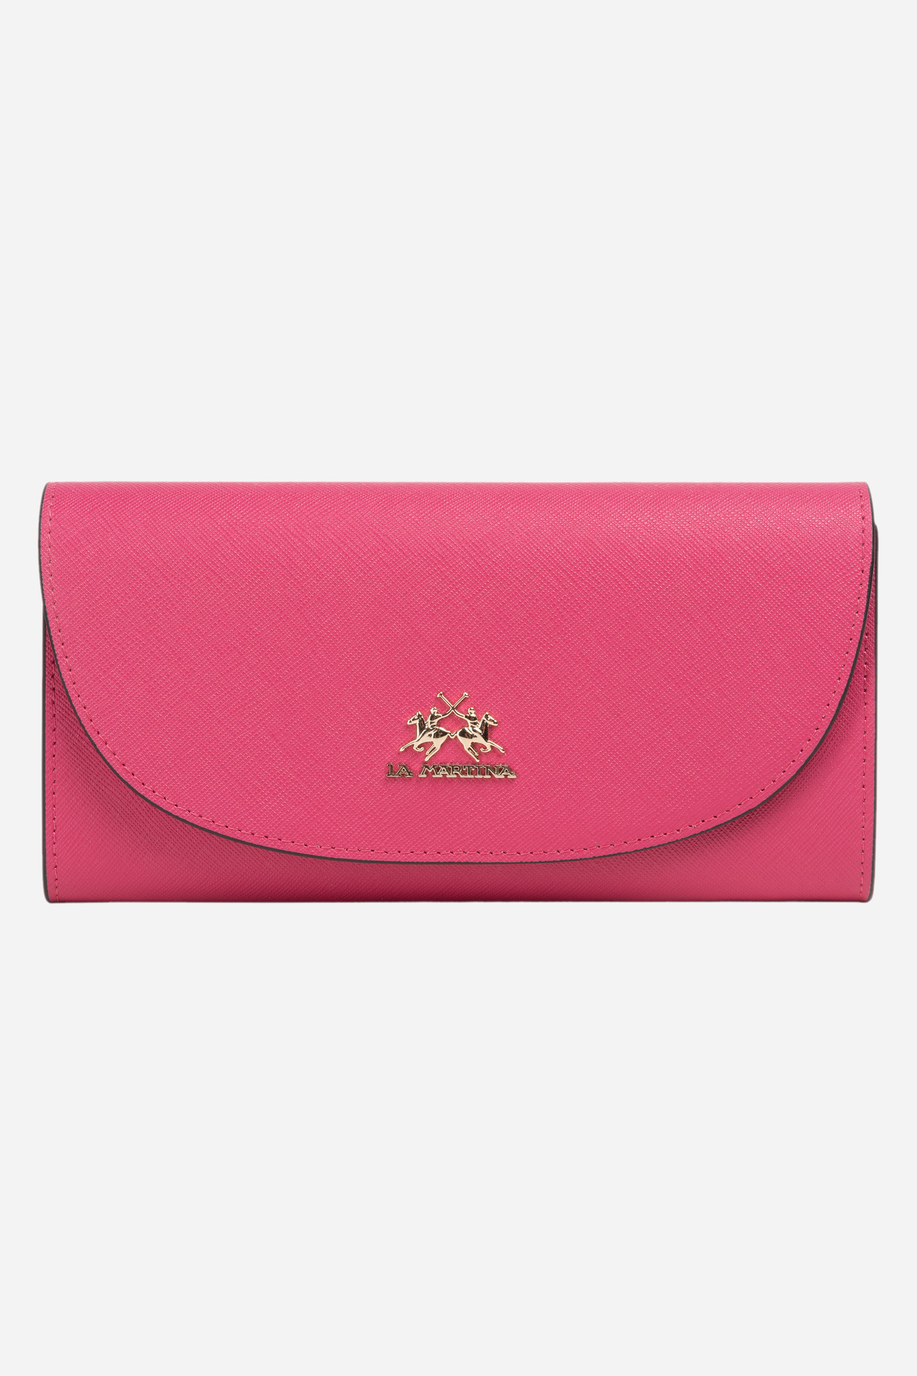 Women's leather wallet - Karina - Small Leather Goods | La Martina - Official Online Shop